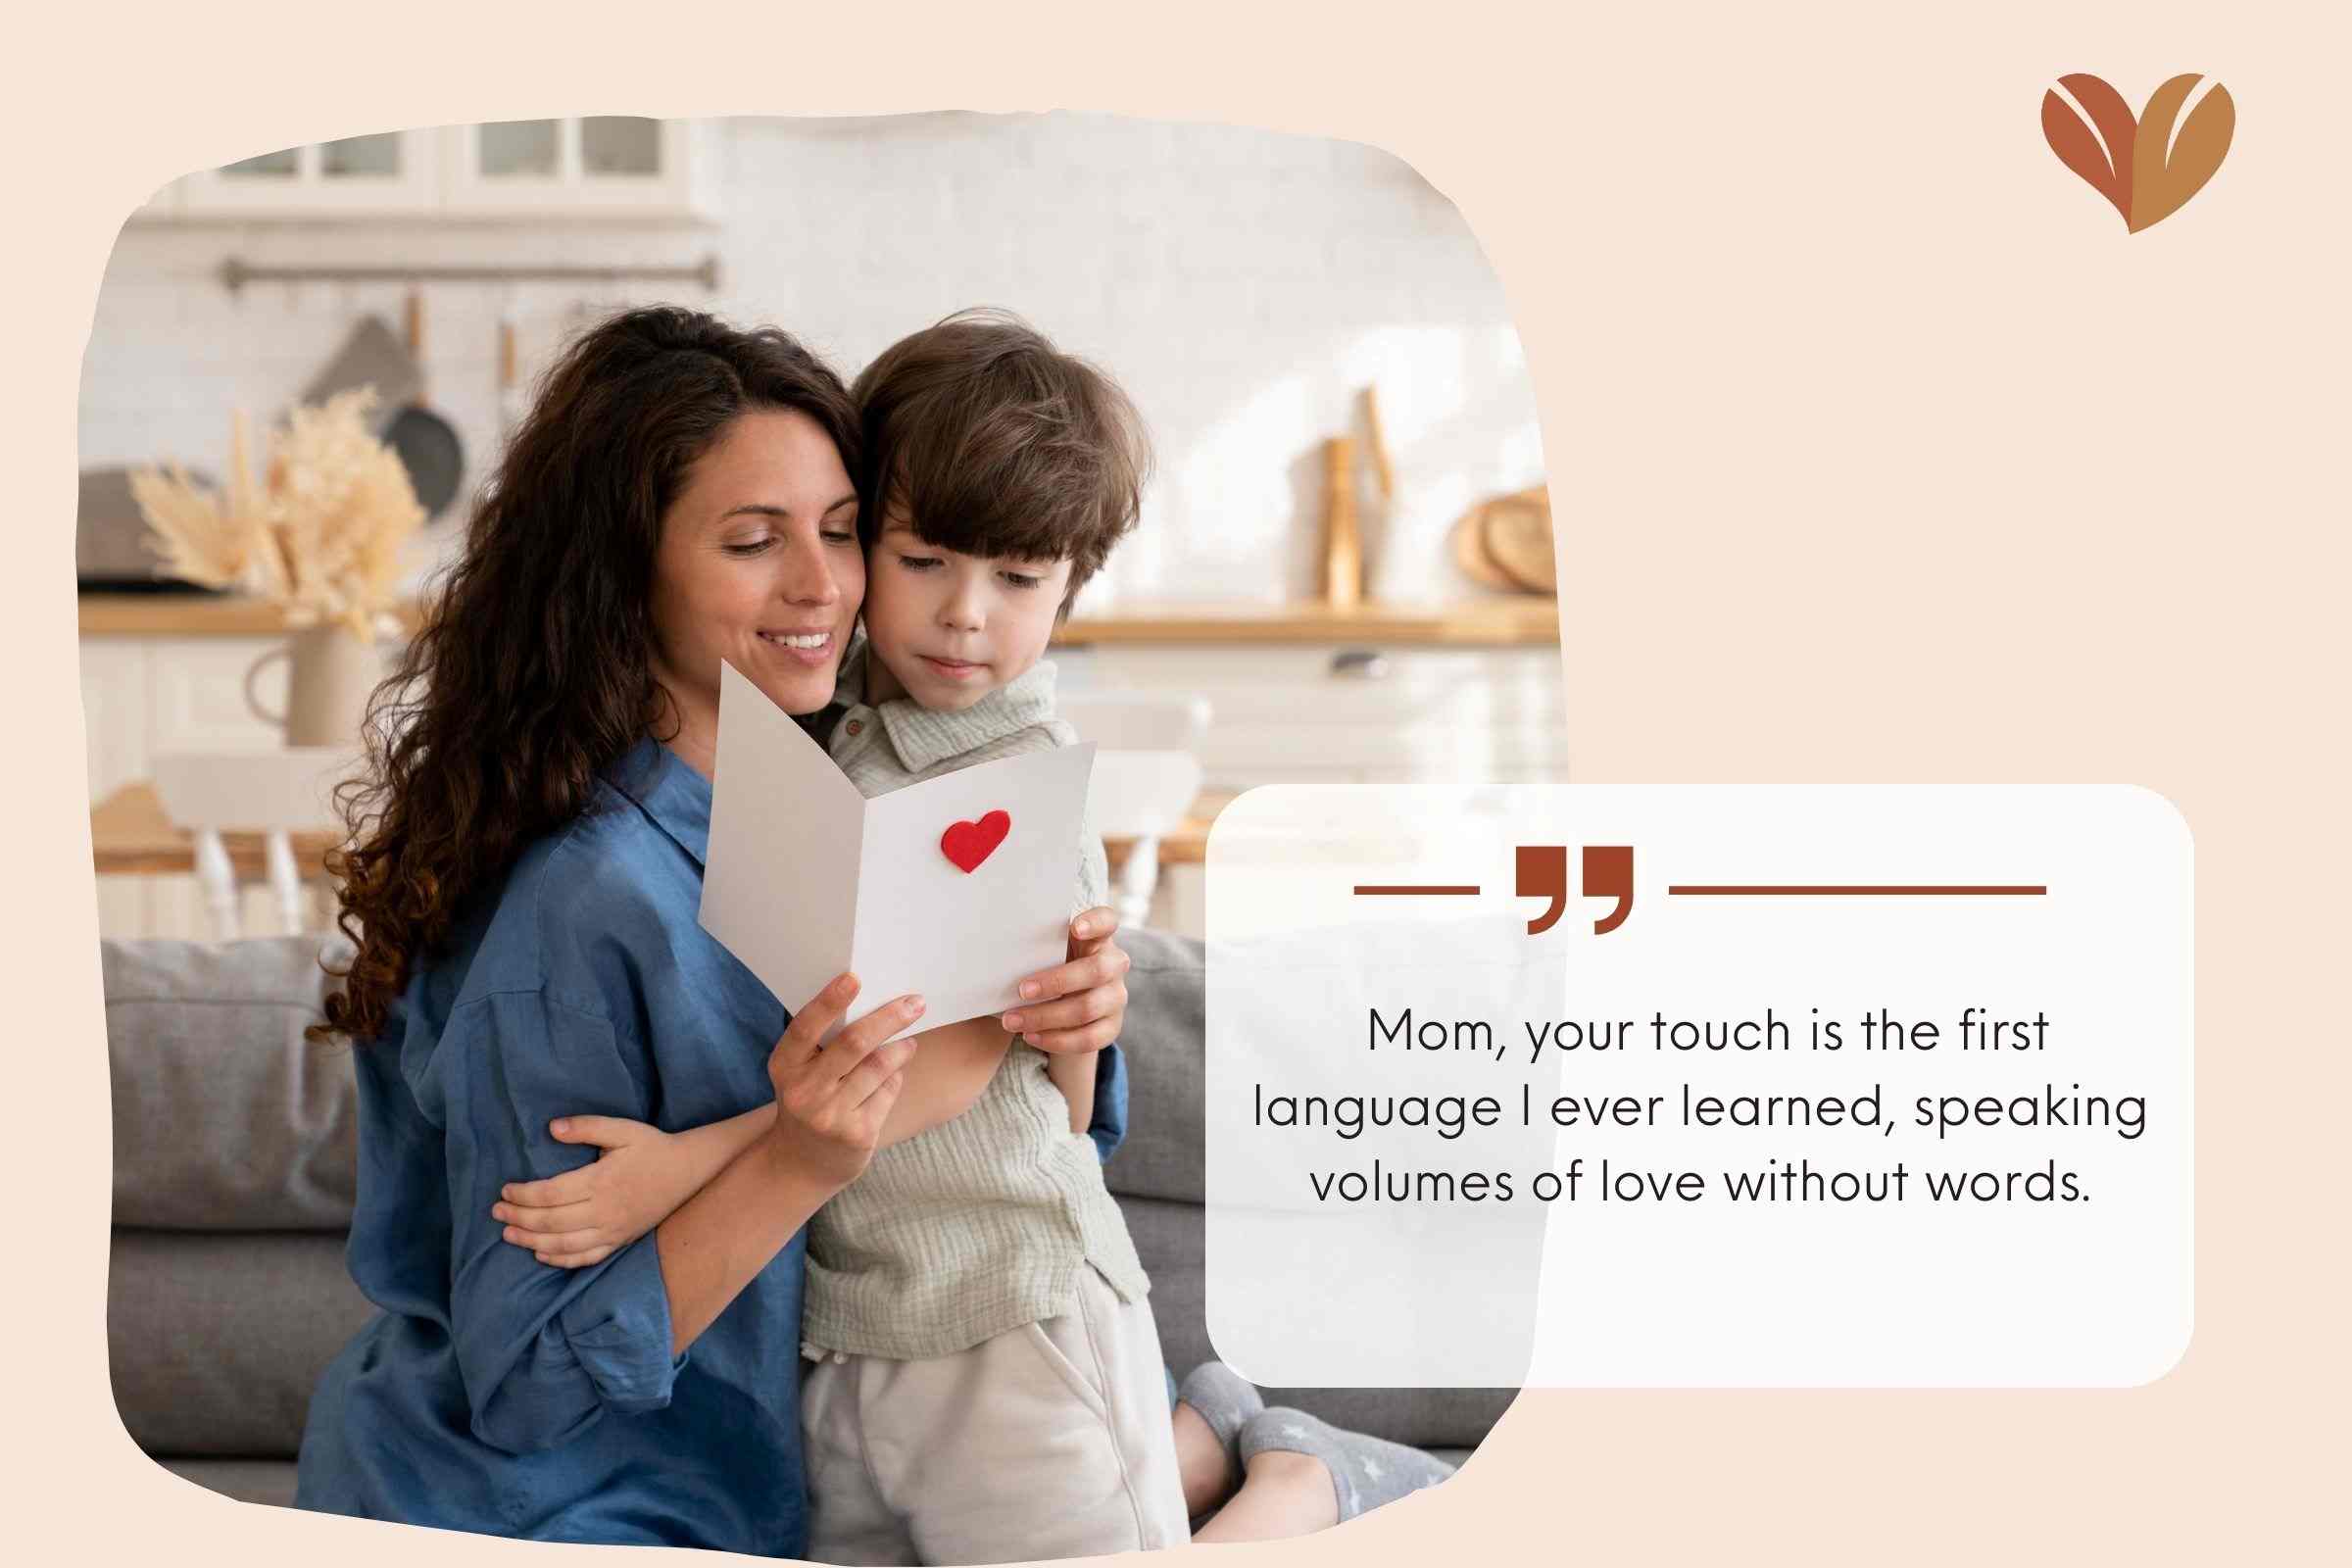 Heartwarming Quotes For Your Mom From Her Son